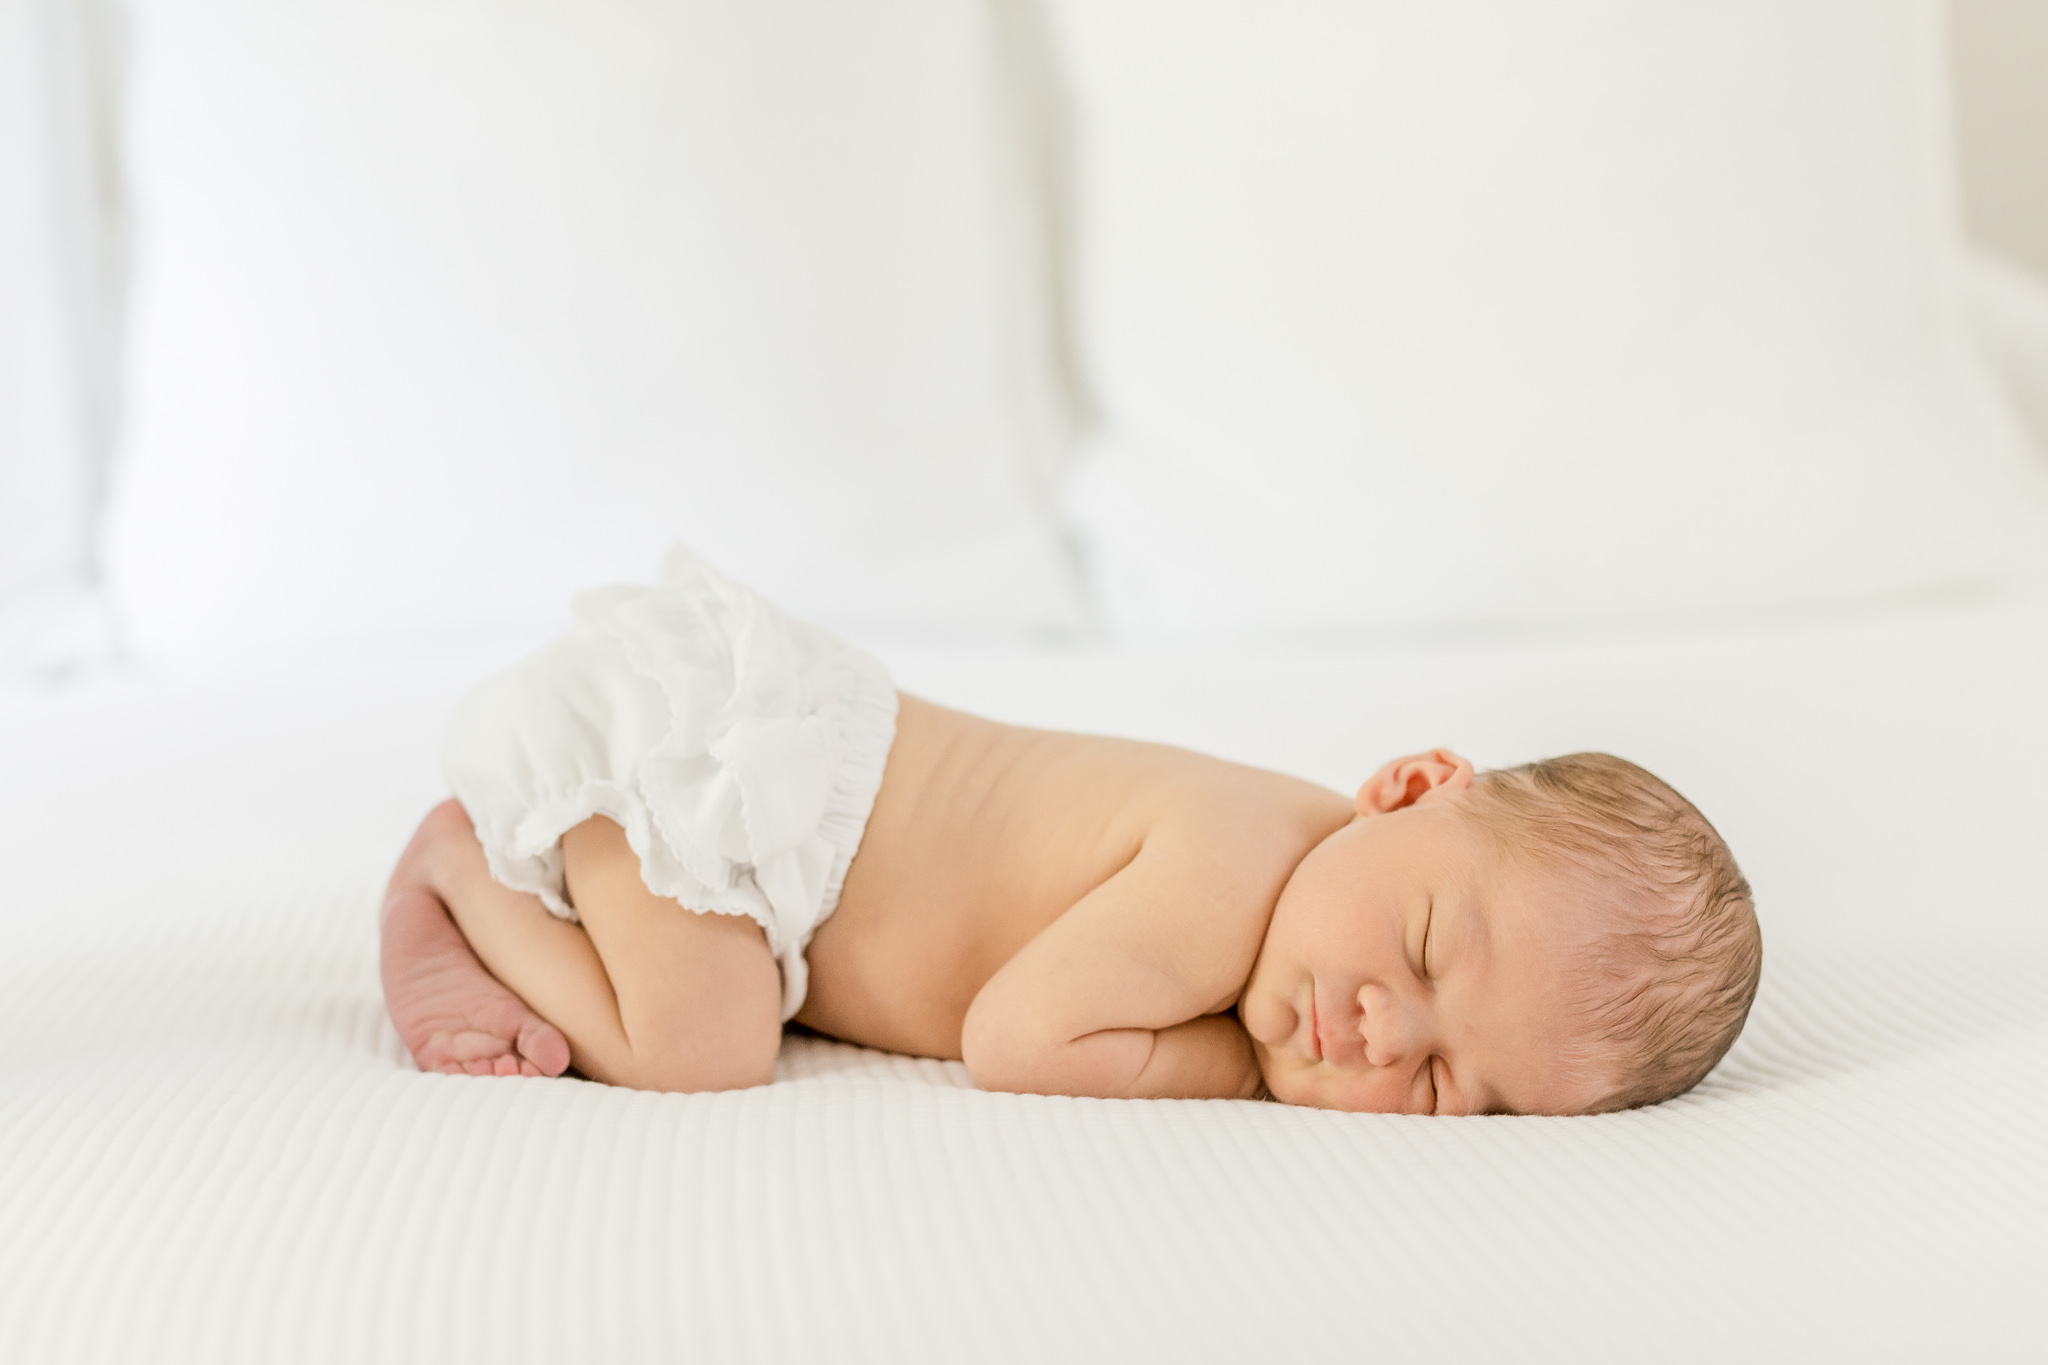 A baby in bloomers snuggled up on a white comforter by Greenville SC newborn photographer Molly Hensley.